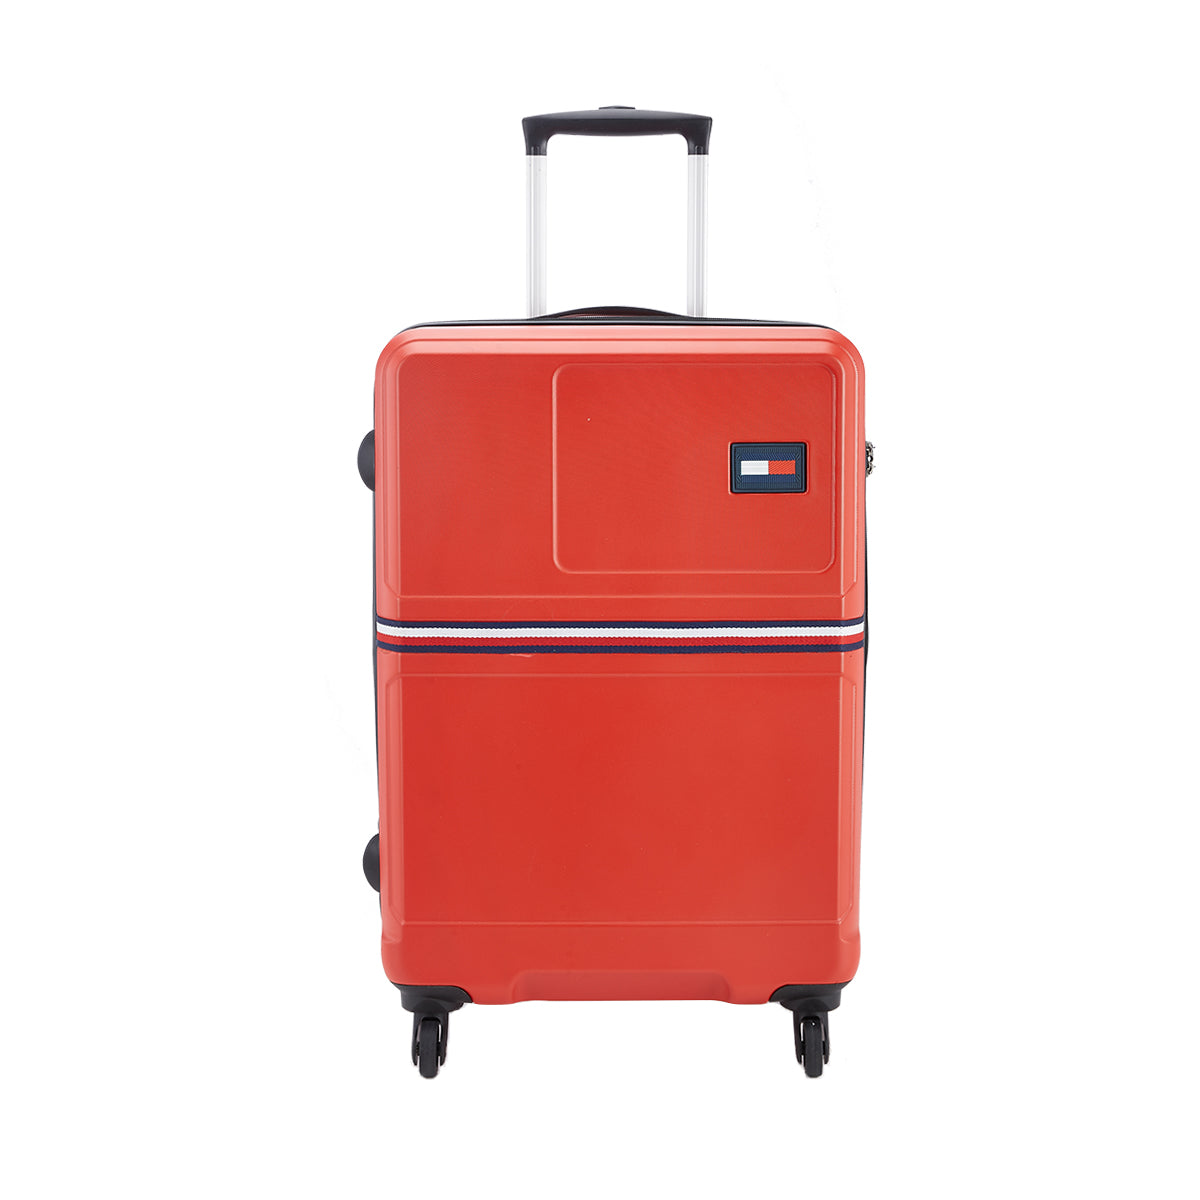 Tommy Hilfiger Marshall Hard Luggage Red